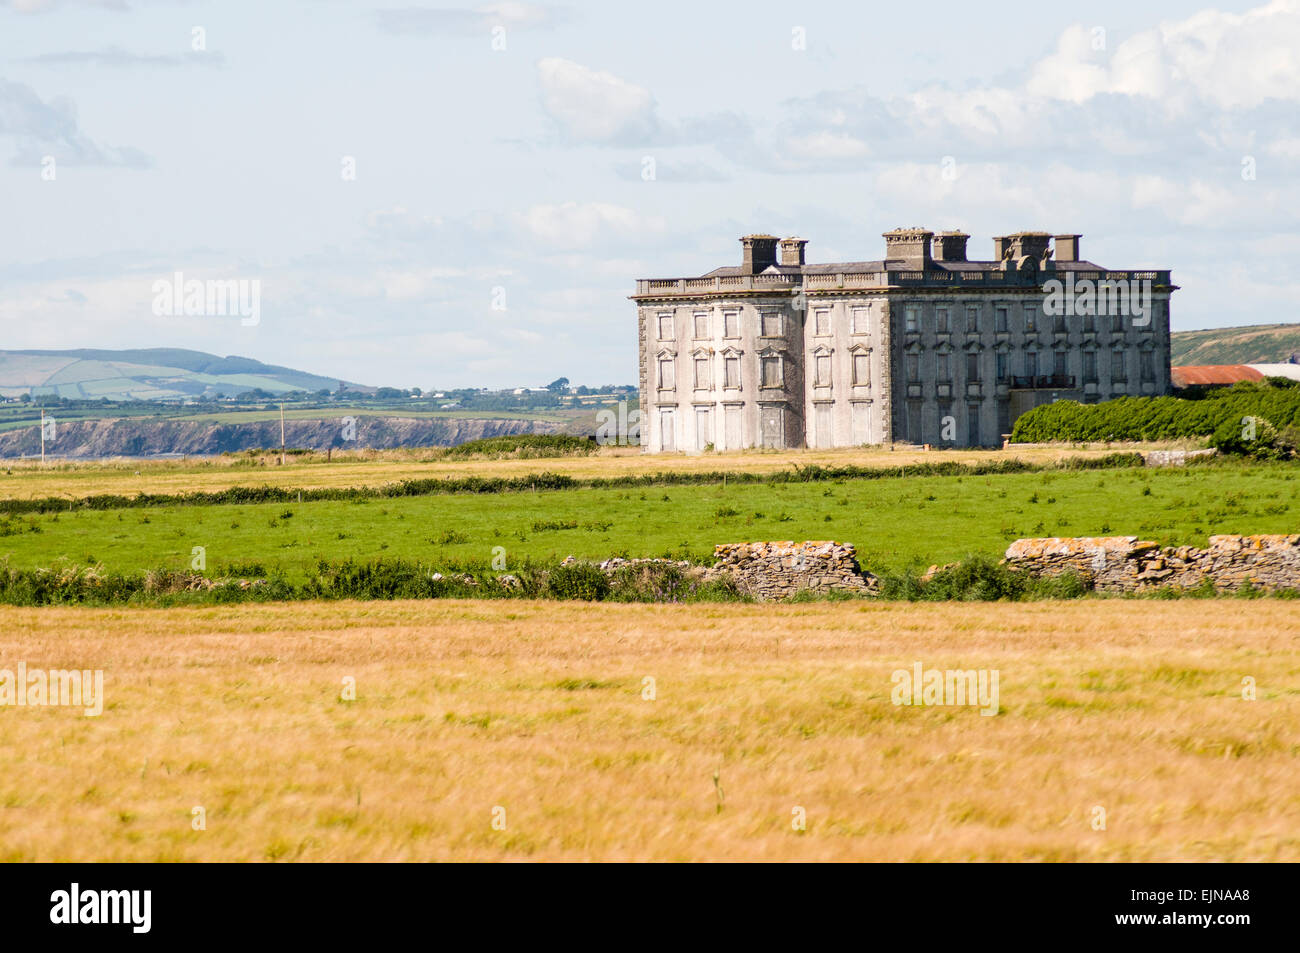 Loftus Hall, Ring of Hook, County Wexford, reported to be Ireland's most haunted house.  The house has reportedly been bought by Bono from U2, and can currently be visited for paranormal tours and experiences Stock Photo